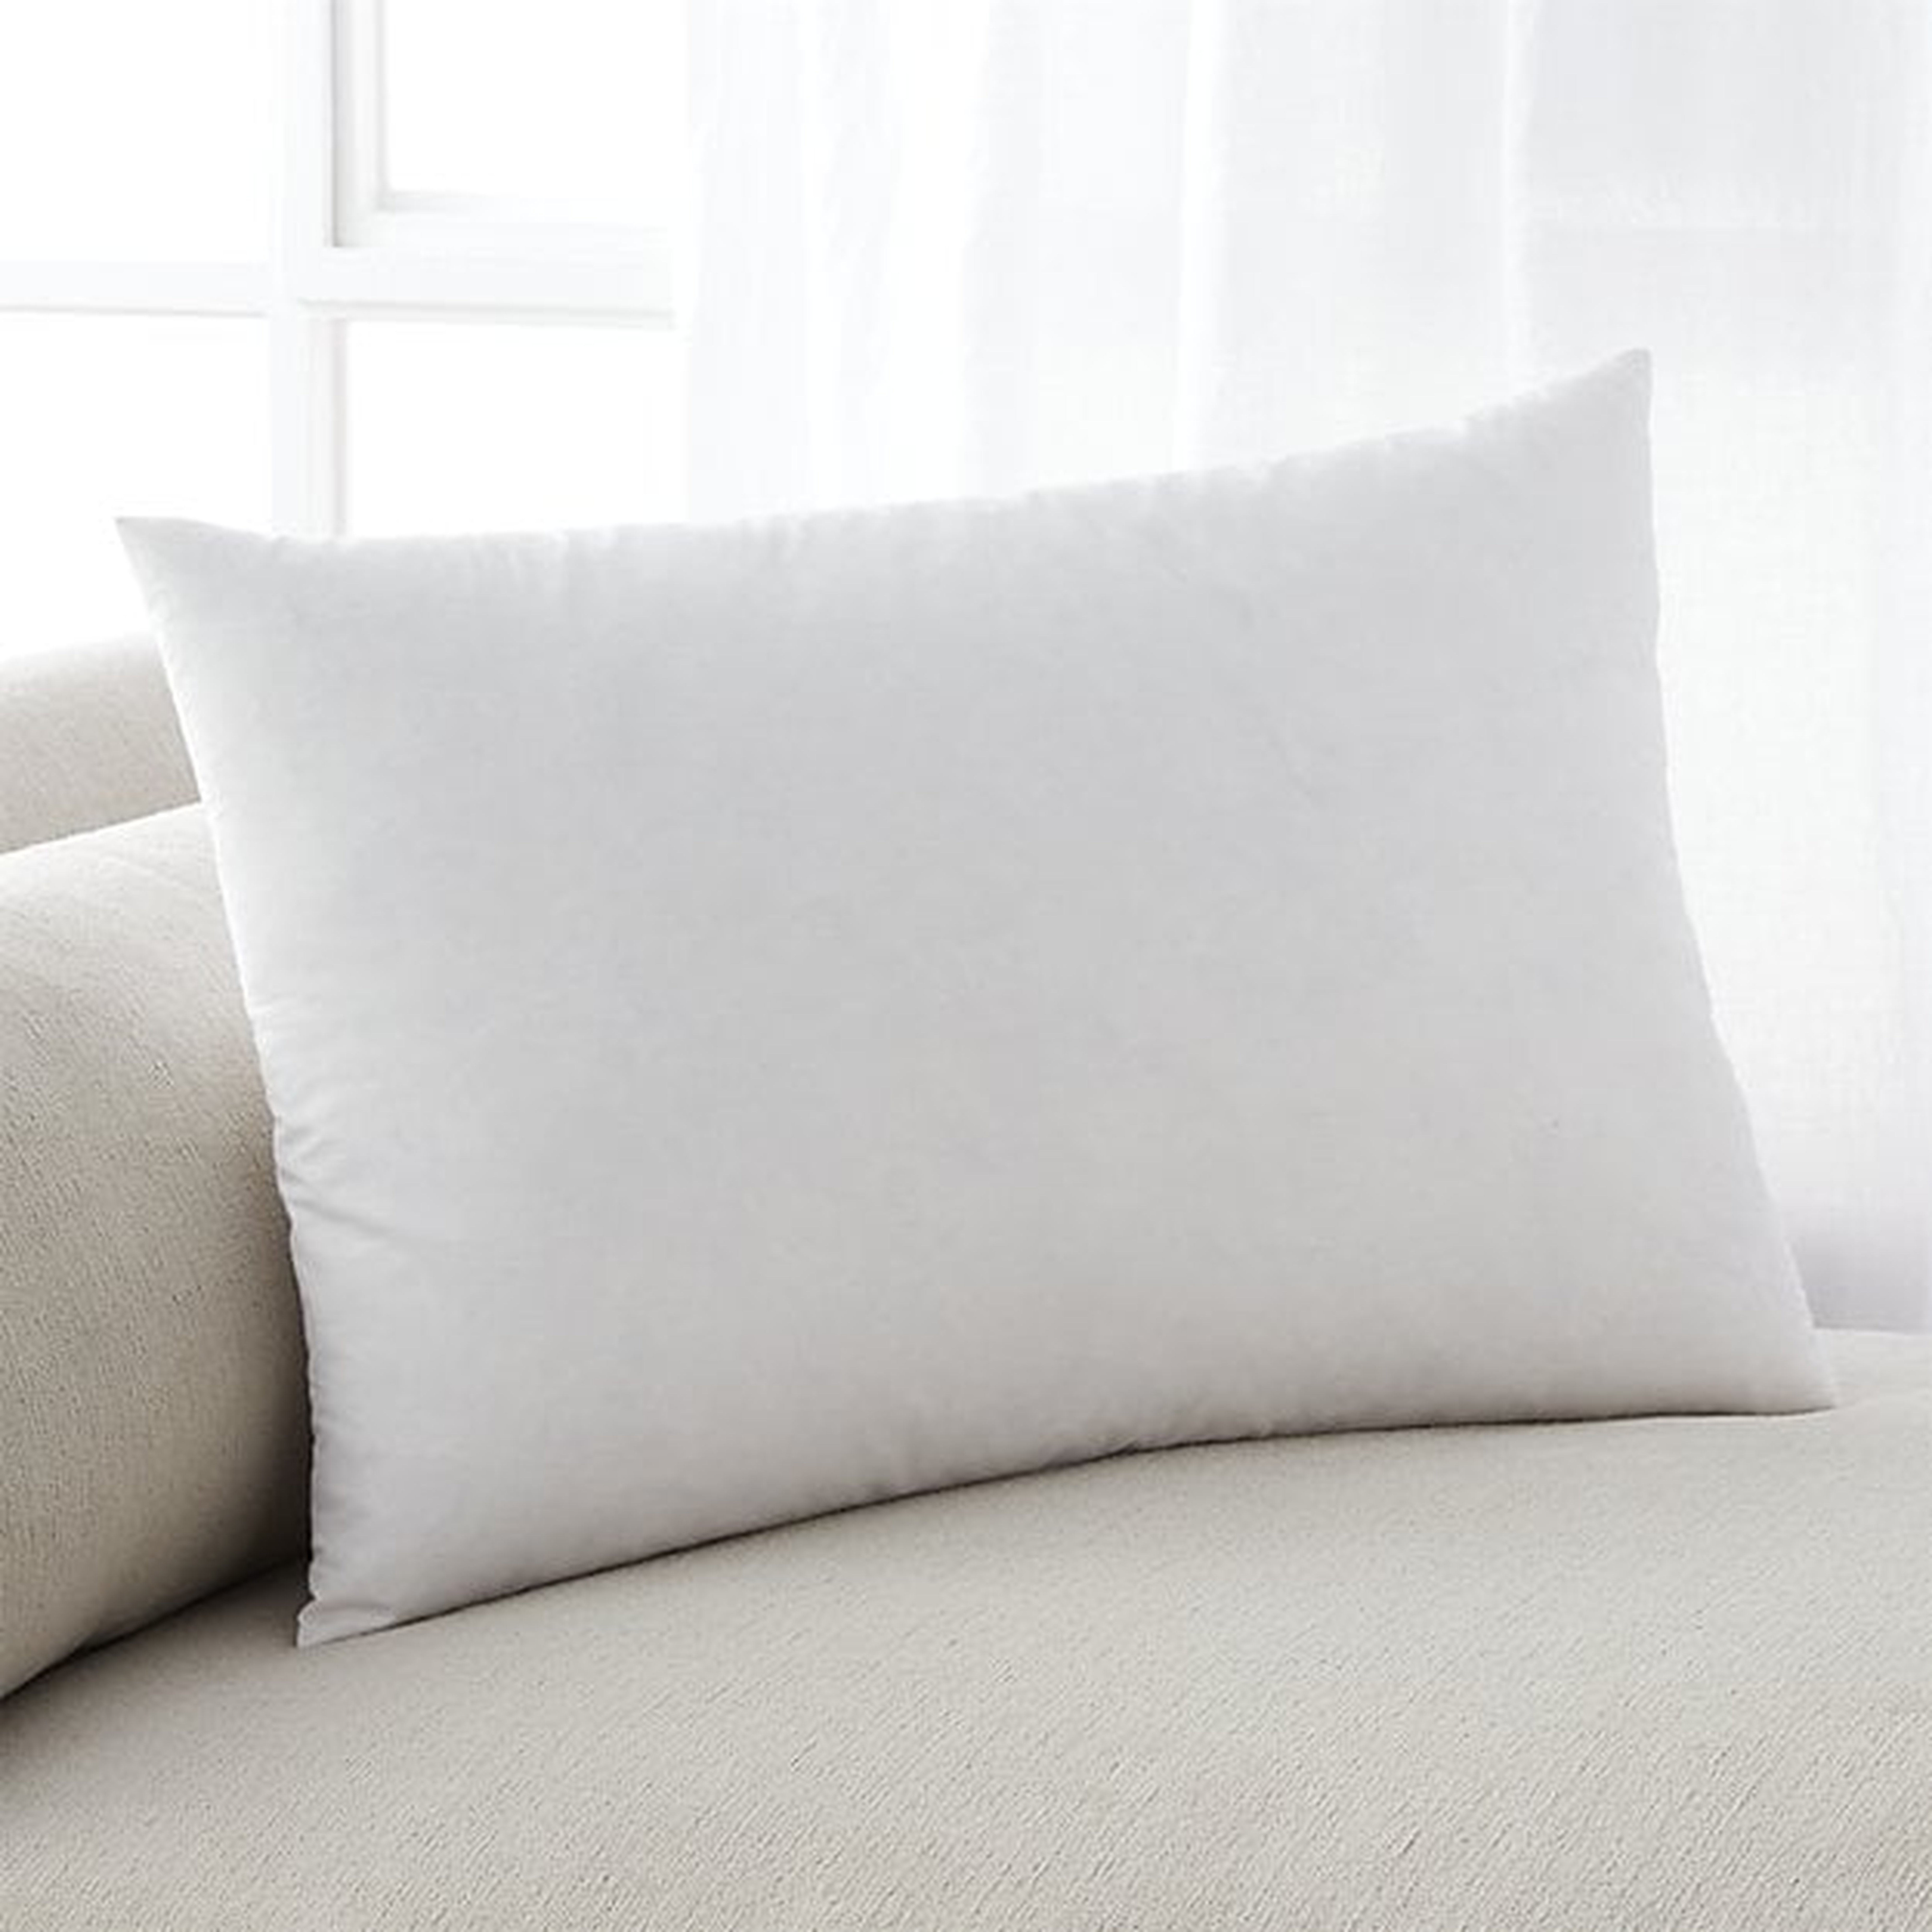 Feather-Down 22"x15" Pillow Insert - Crate and Barrel